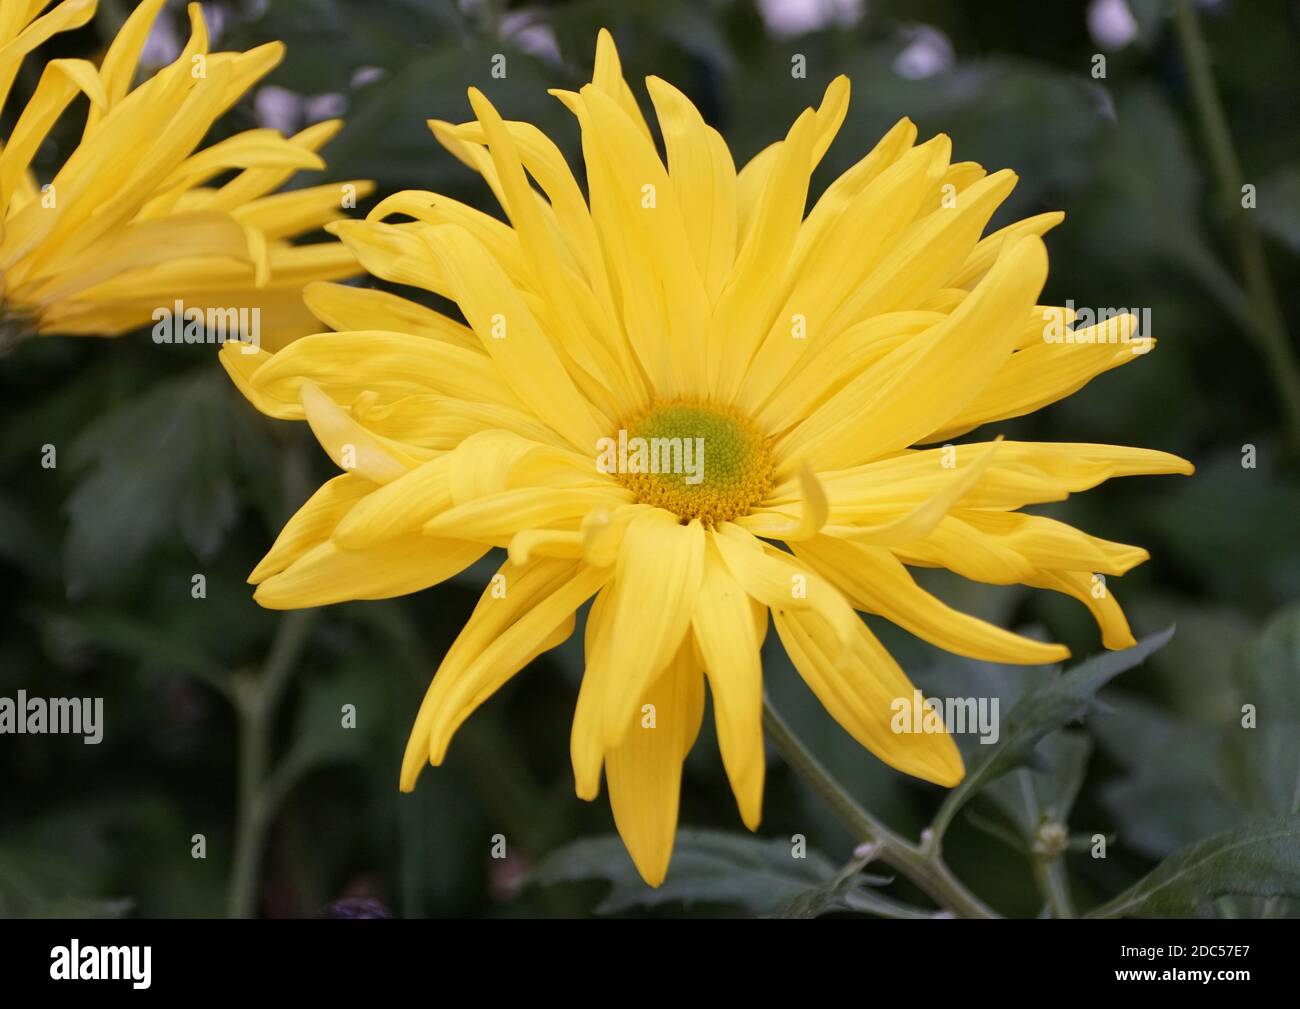 Bright yellow color of Single mum 'Peggy Stevens' Stock Photo